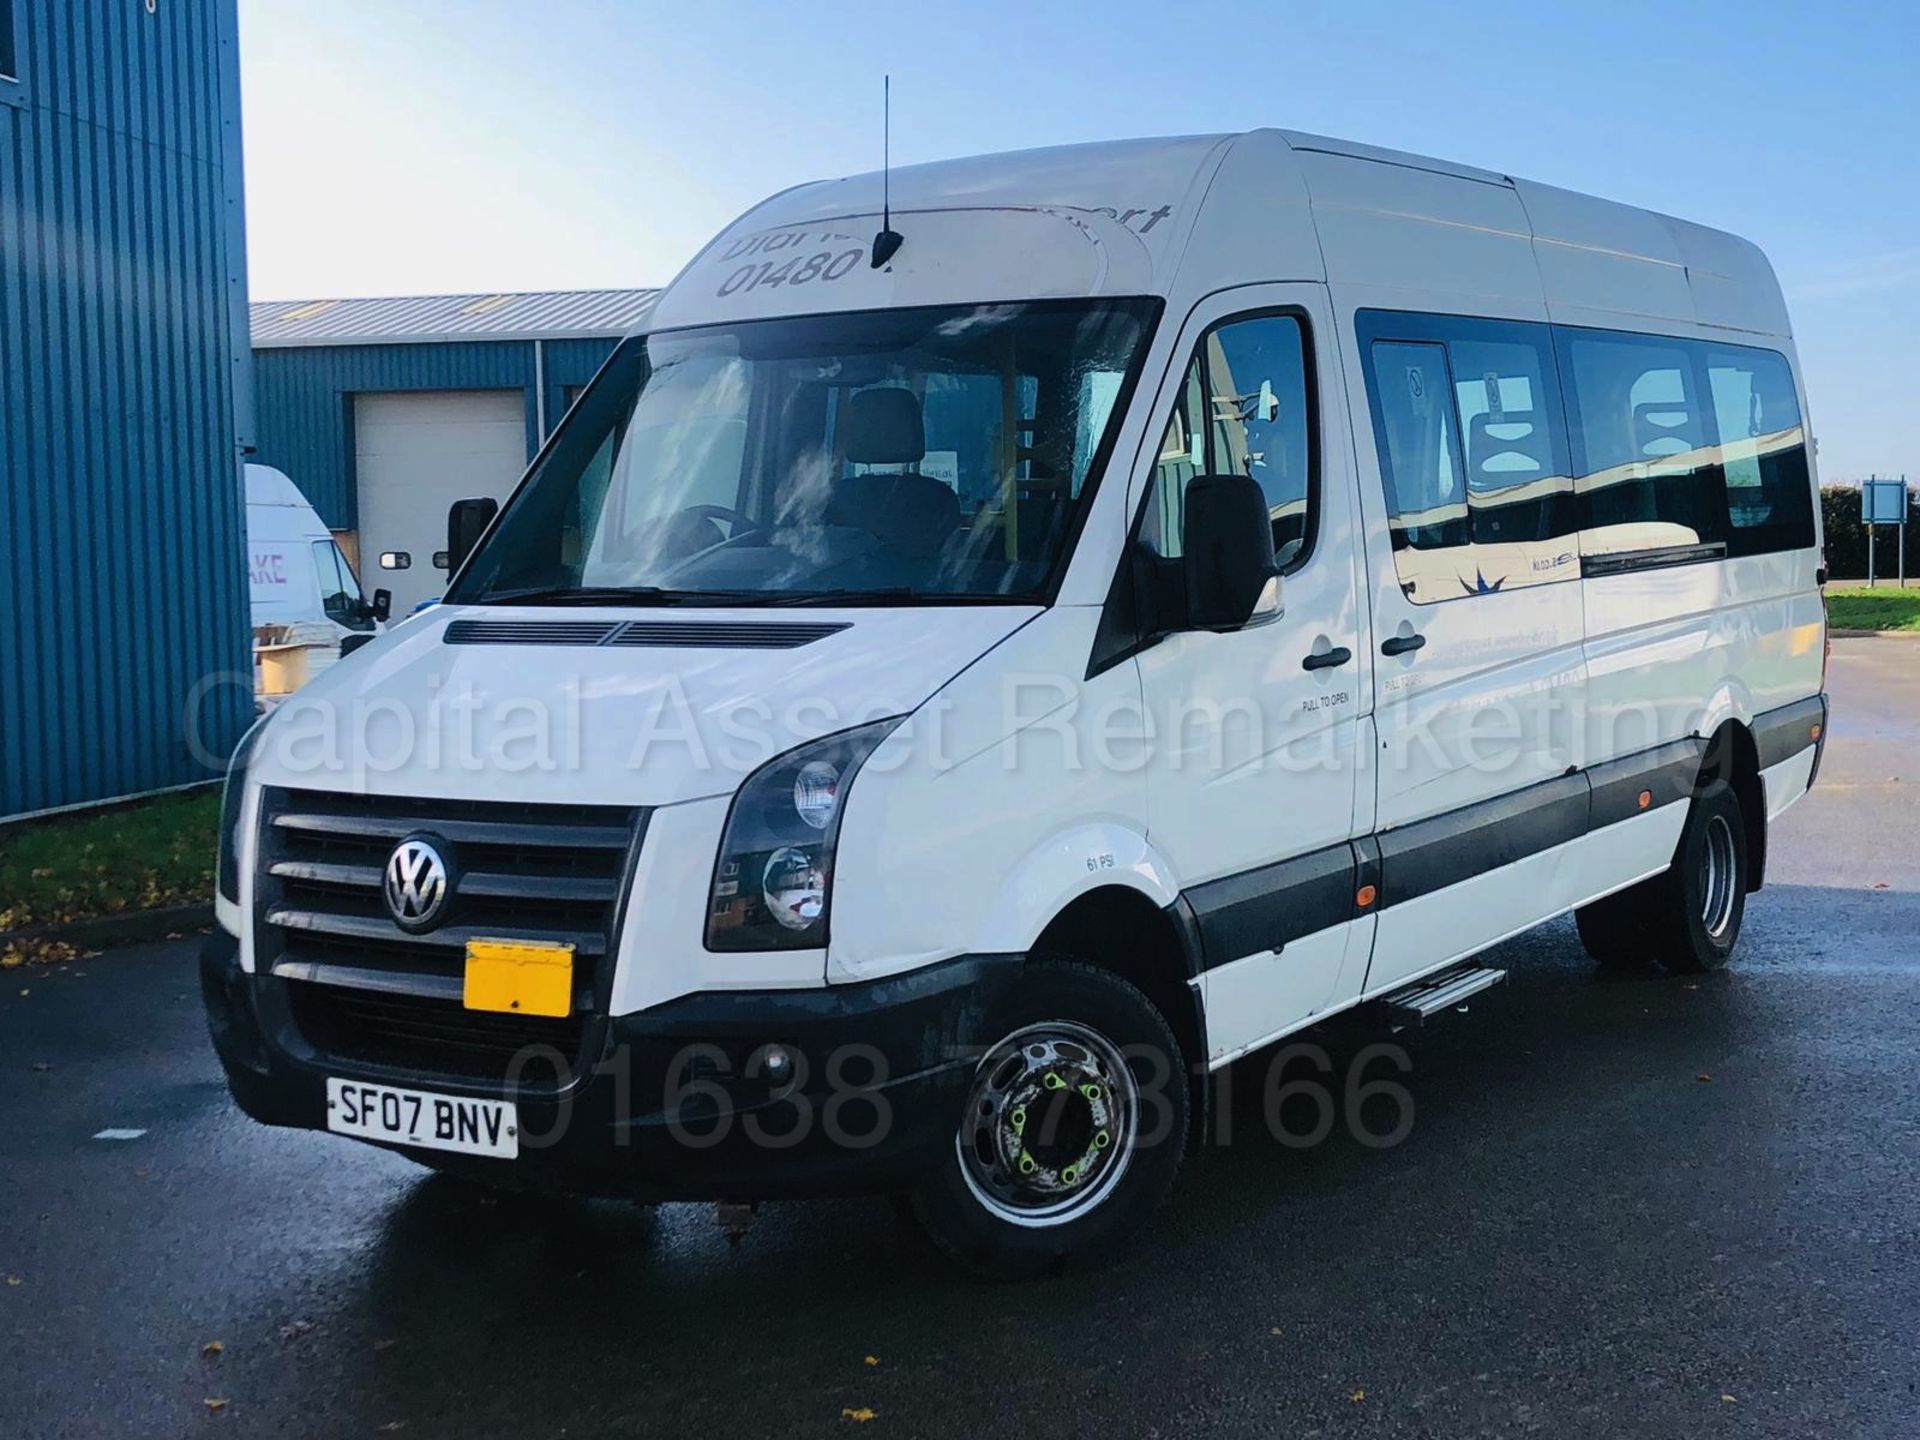 VOLKSWAGEN CRAFTER 2.5 TDI *LWB - 16 SEATER MINI-BUS / COACH* (2007) *ELECTRIC WHEEL CHAIR LIFT* - Image 9 of 38